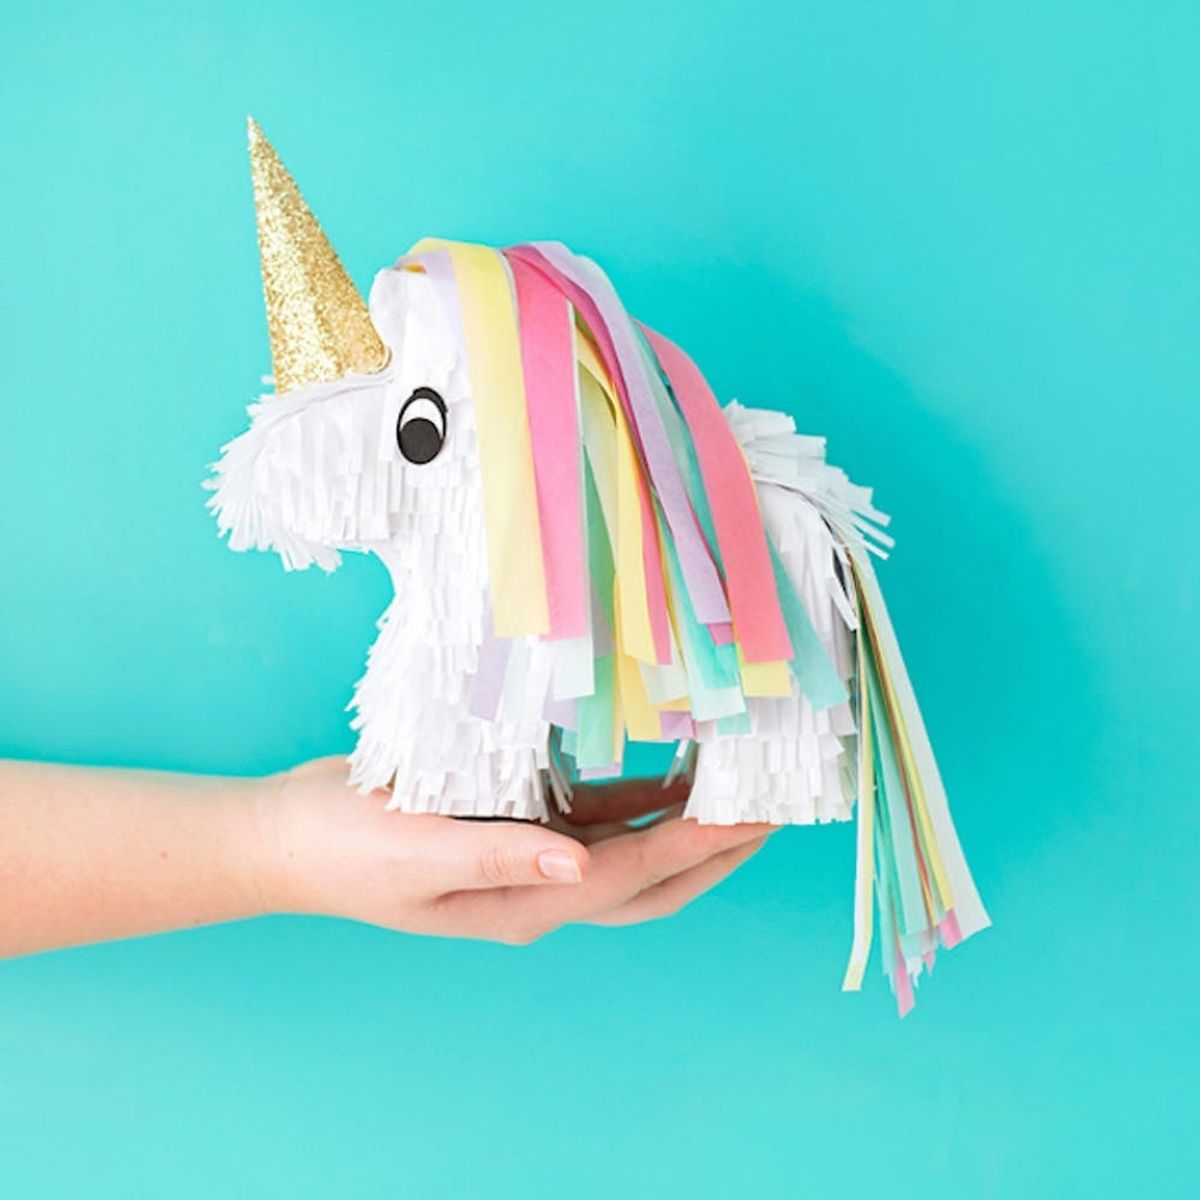 These 21 Unicorn DIY Projects Will Make All Your Dreams Come True